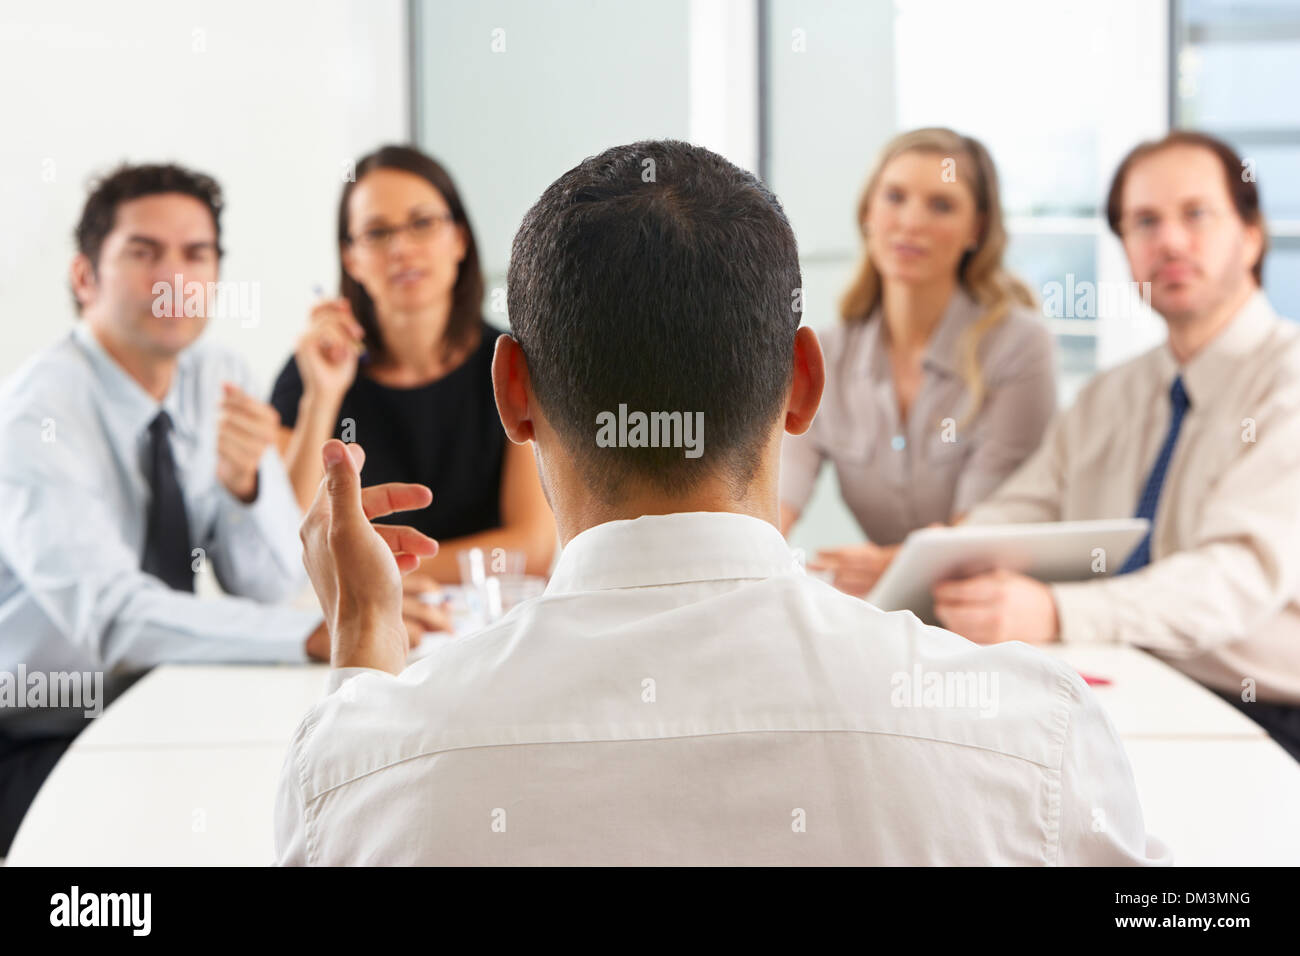 View From Behind As CEO Addresses Meeting In Boardroom Stock Photo